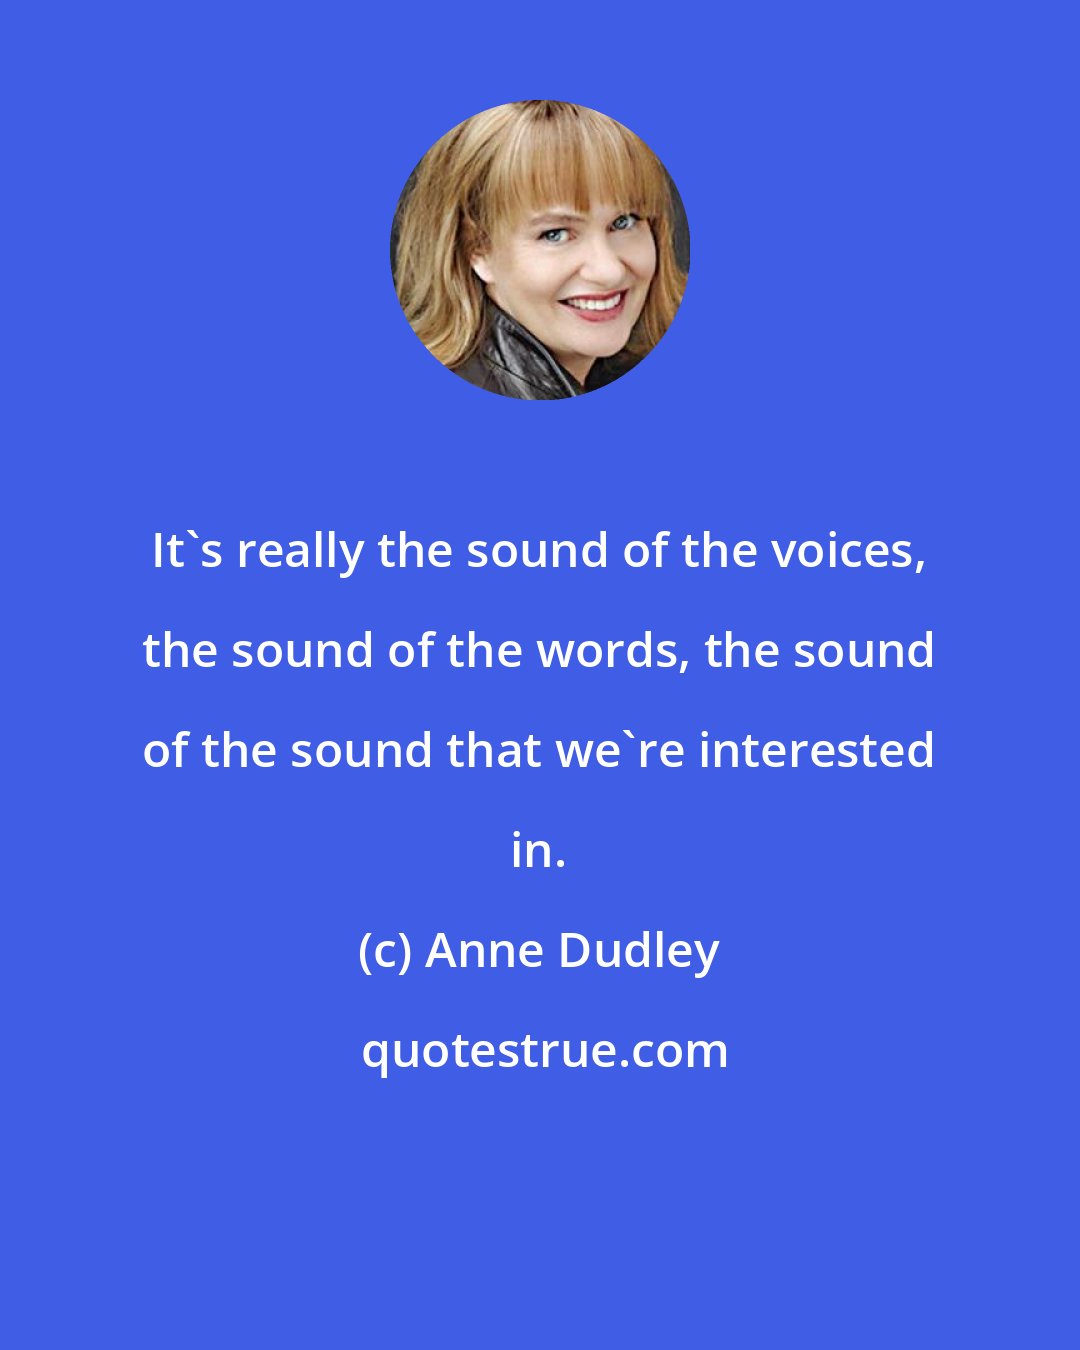 Anne Dudley: It's really the sound of the voices, the sound of the words, the sound of the sound that we're interested in.